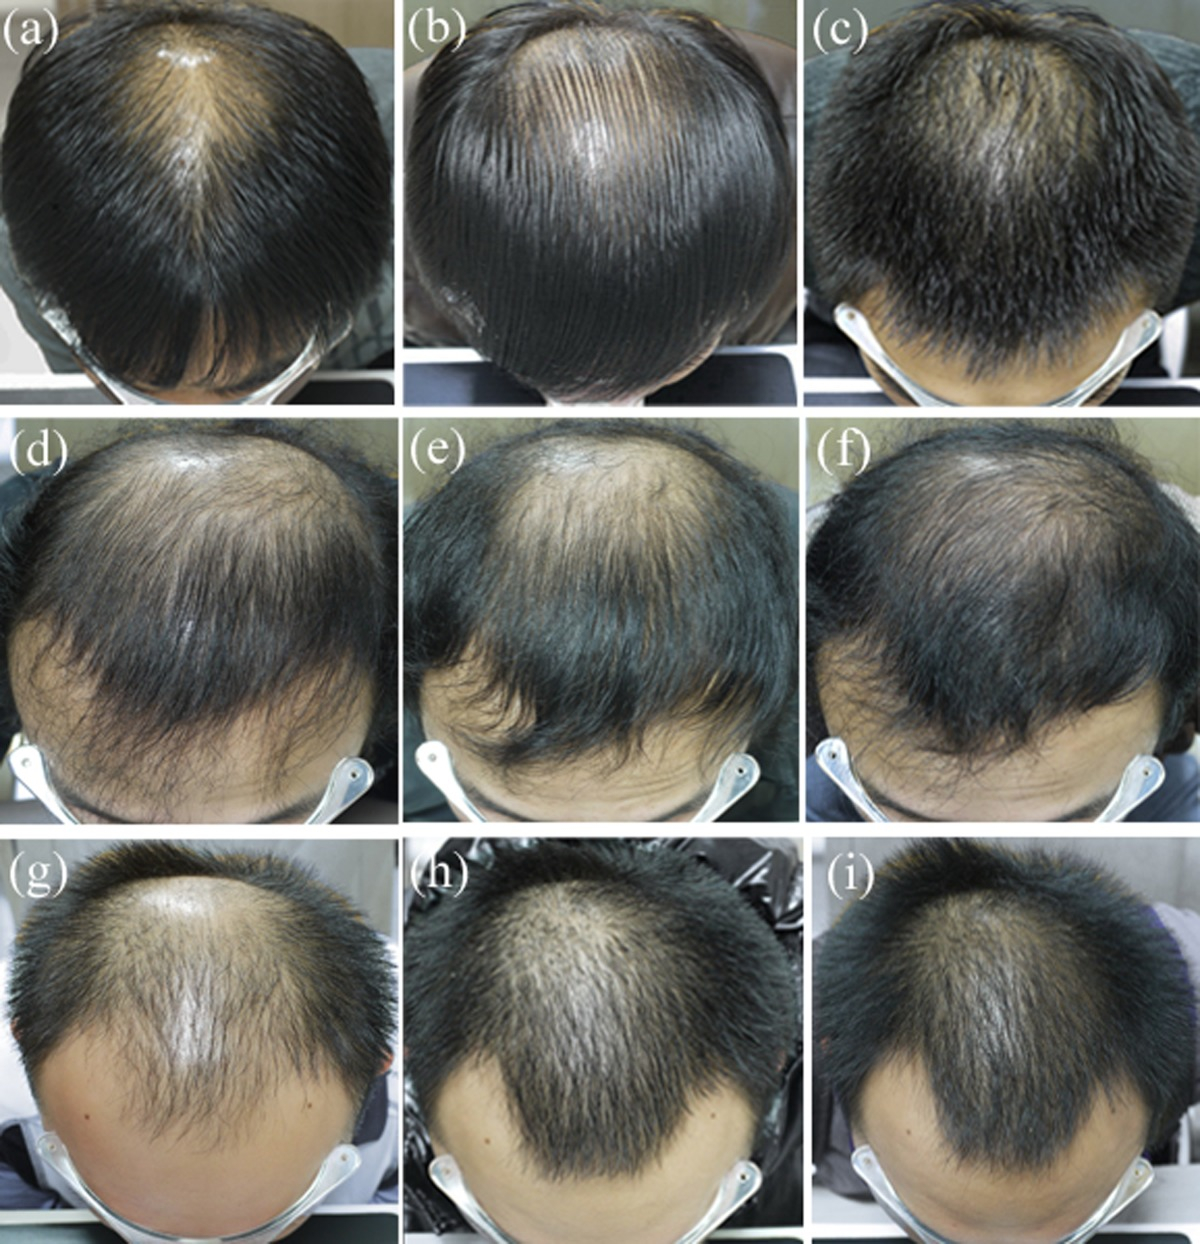 3 patients after 6 and 12 months of finasteride treatment